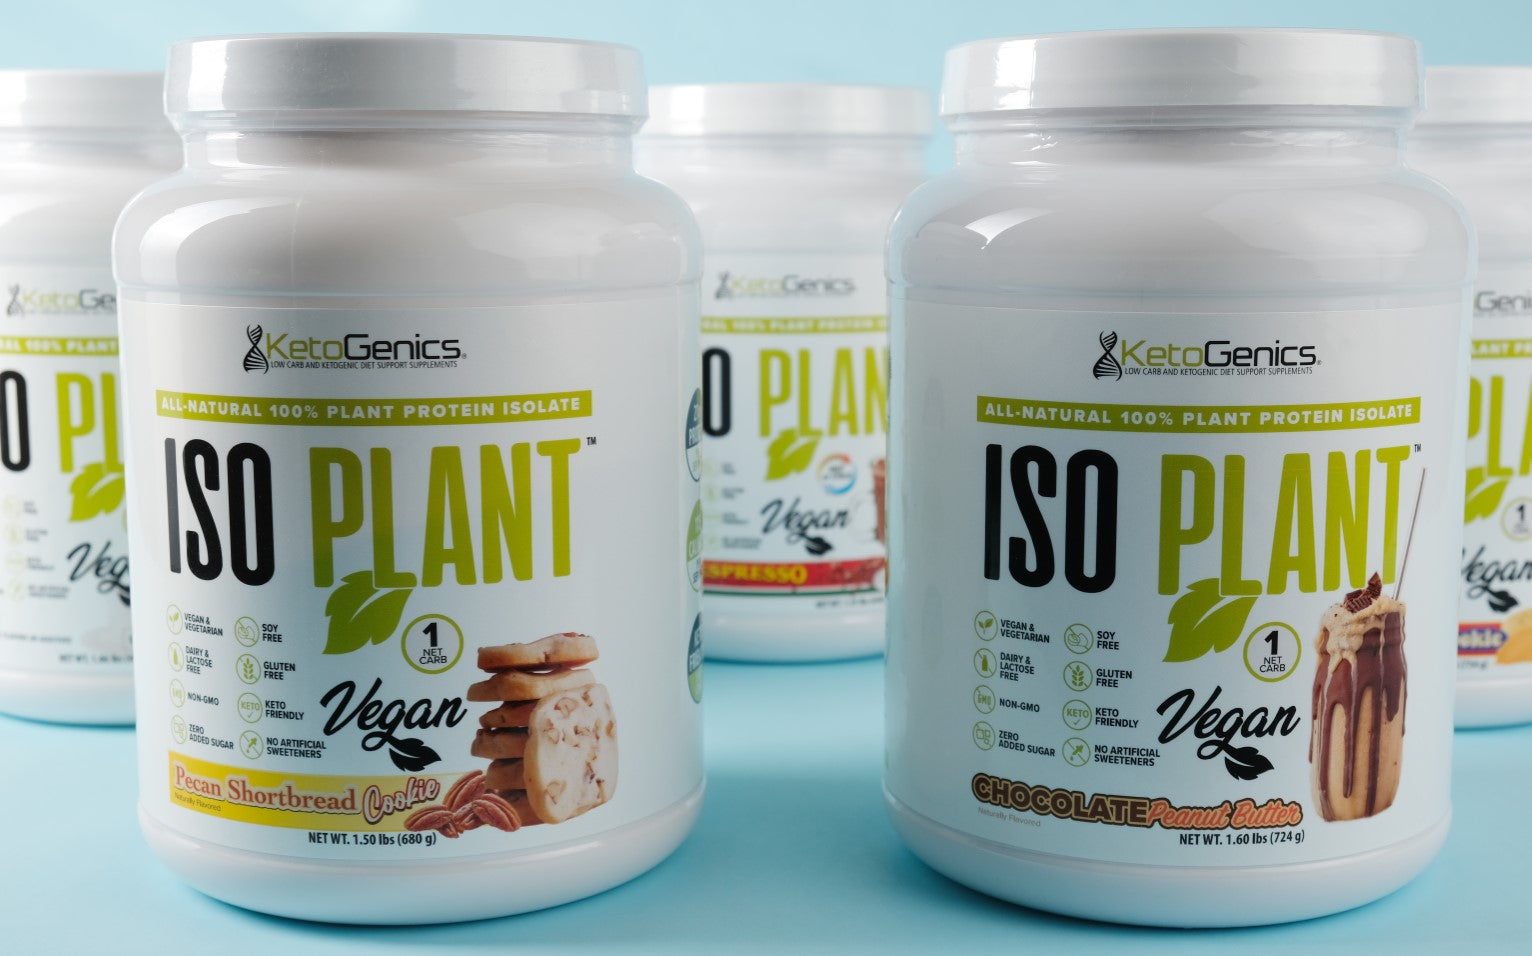 Vegan, Plant- Based & Dairy Free Protein and Collagen Proteins